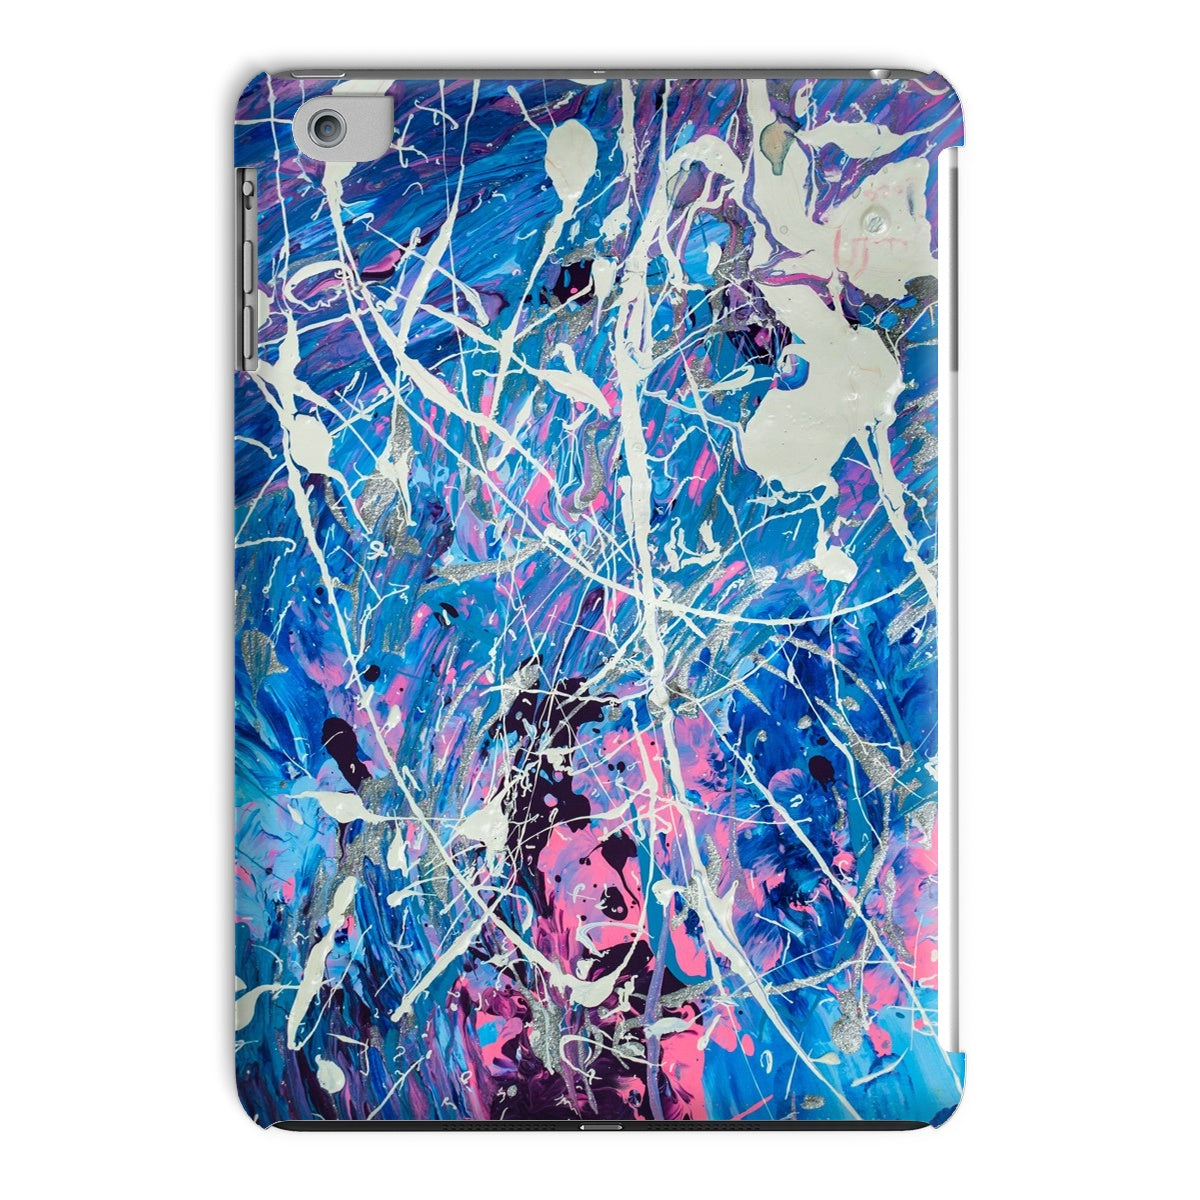 Messy Love Tablet Cases